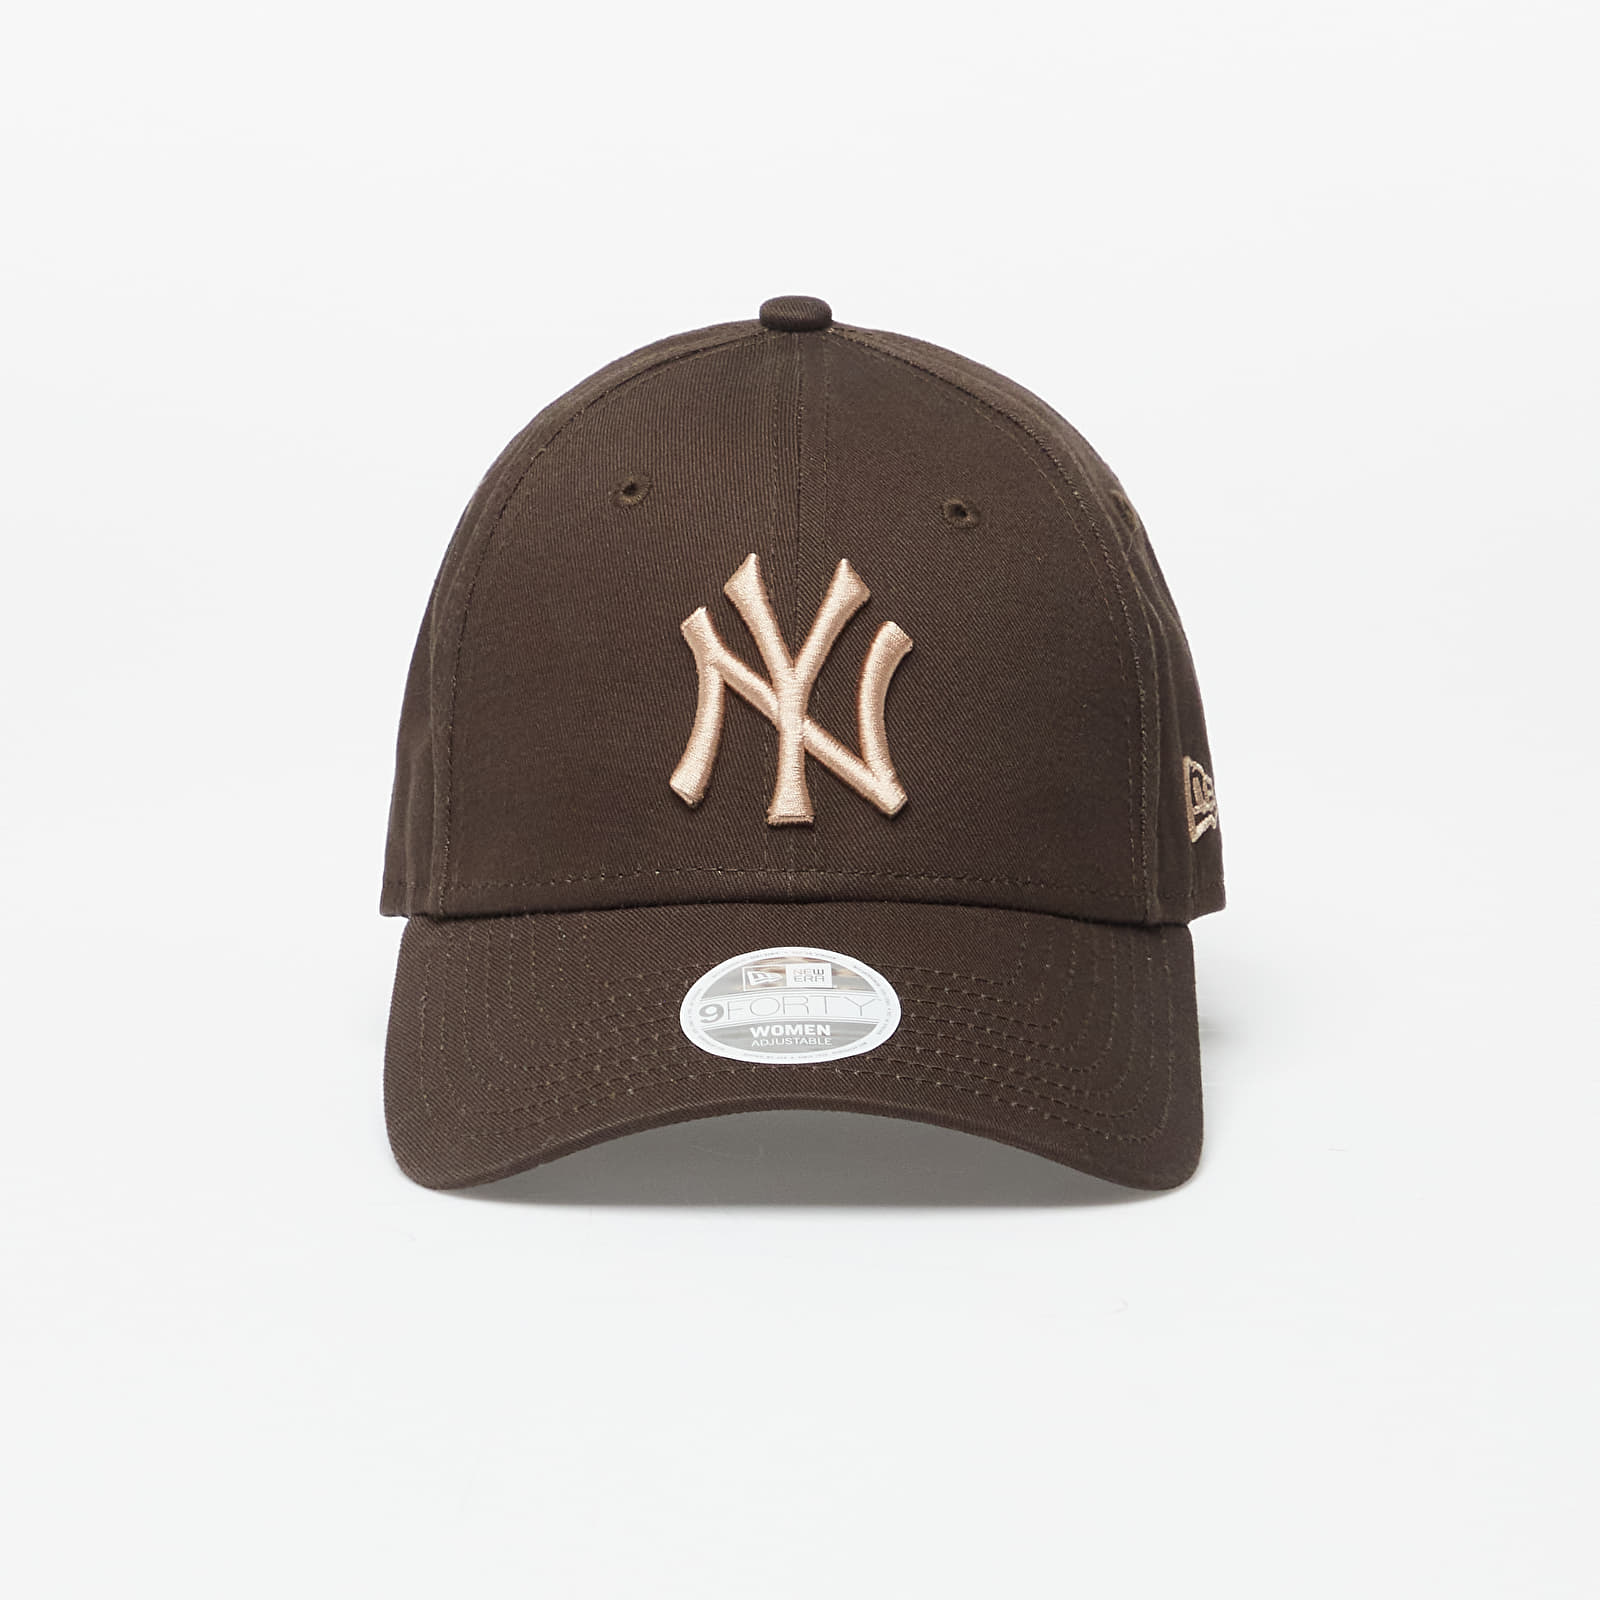 Caps New Era New York Yankees Womens League Essential 9FORTY Adjustable Cap Brown Suede/ Camel